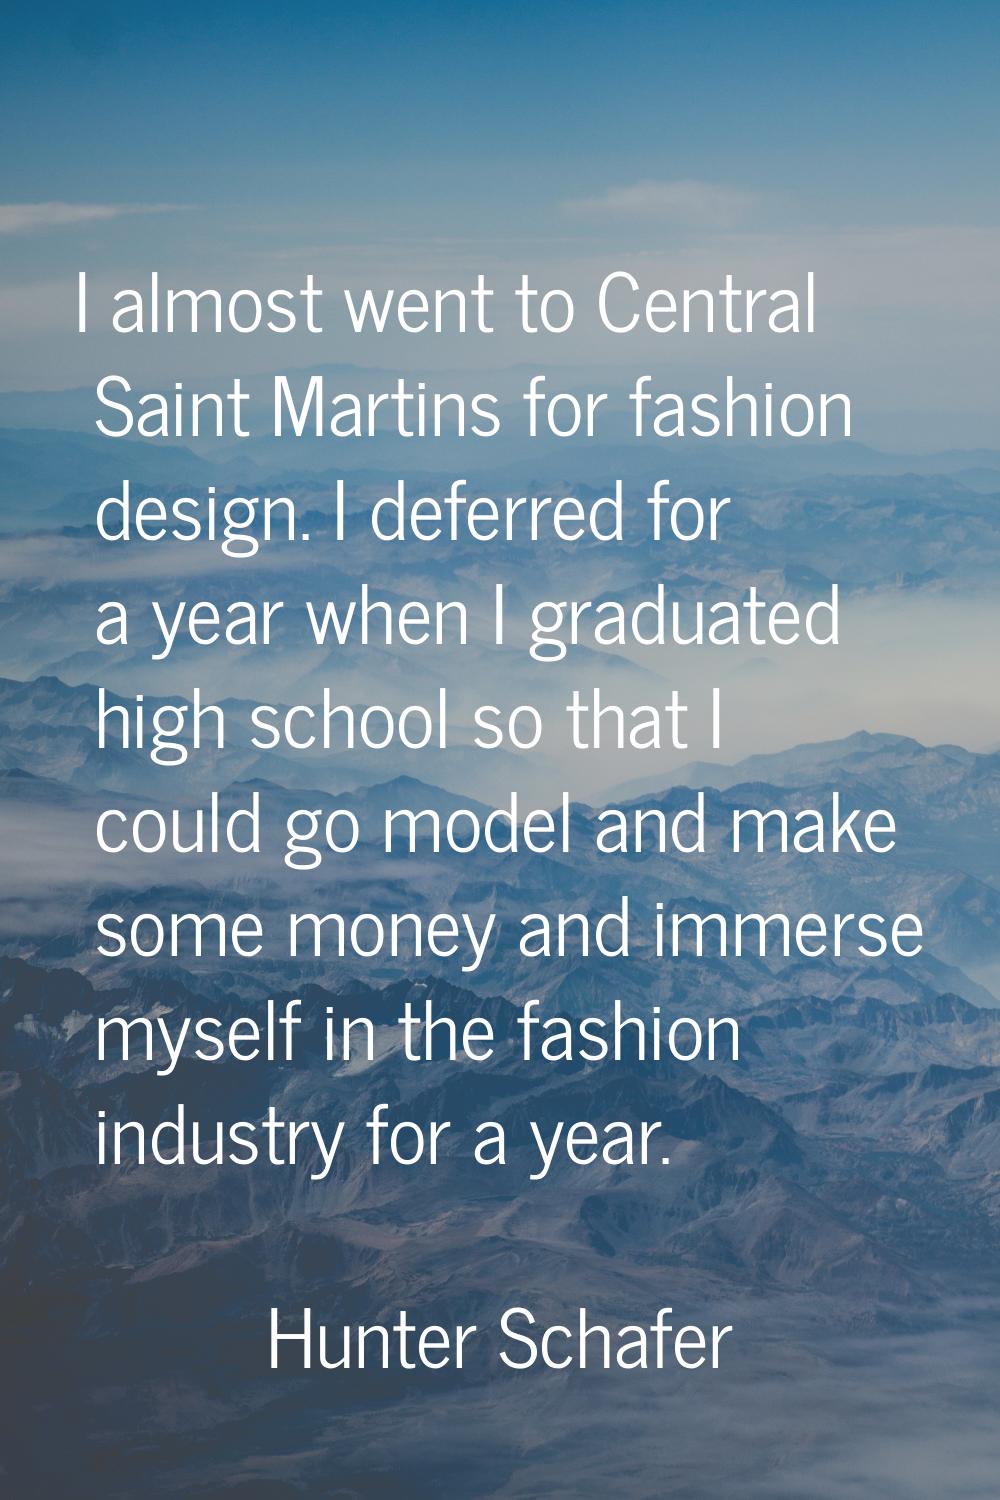 I almost went to Central Saint Martins for fashion design. I deferred for a year when I graduated h